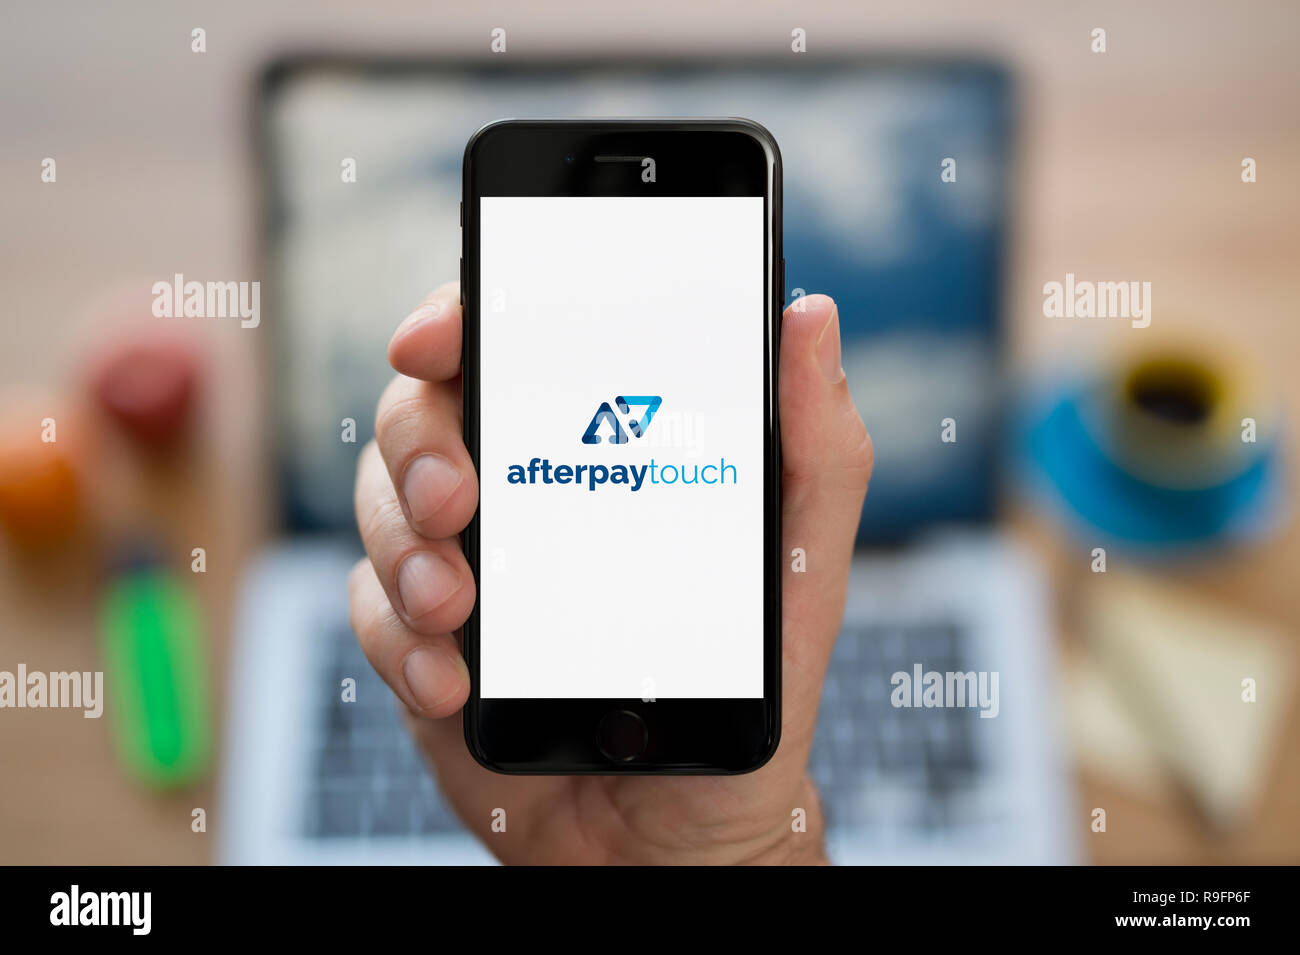 A man looks at his iPhone which displays the Afterpay Touch logo (Editorial use only). Stock Photo